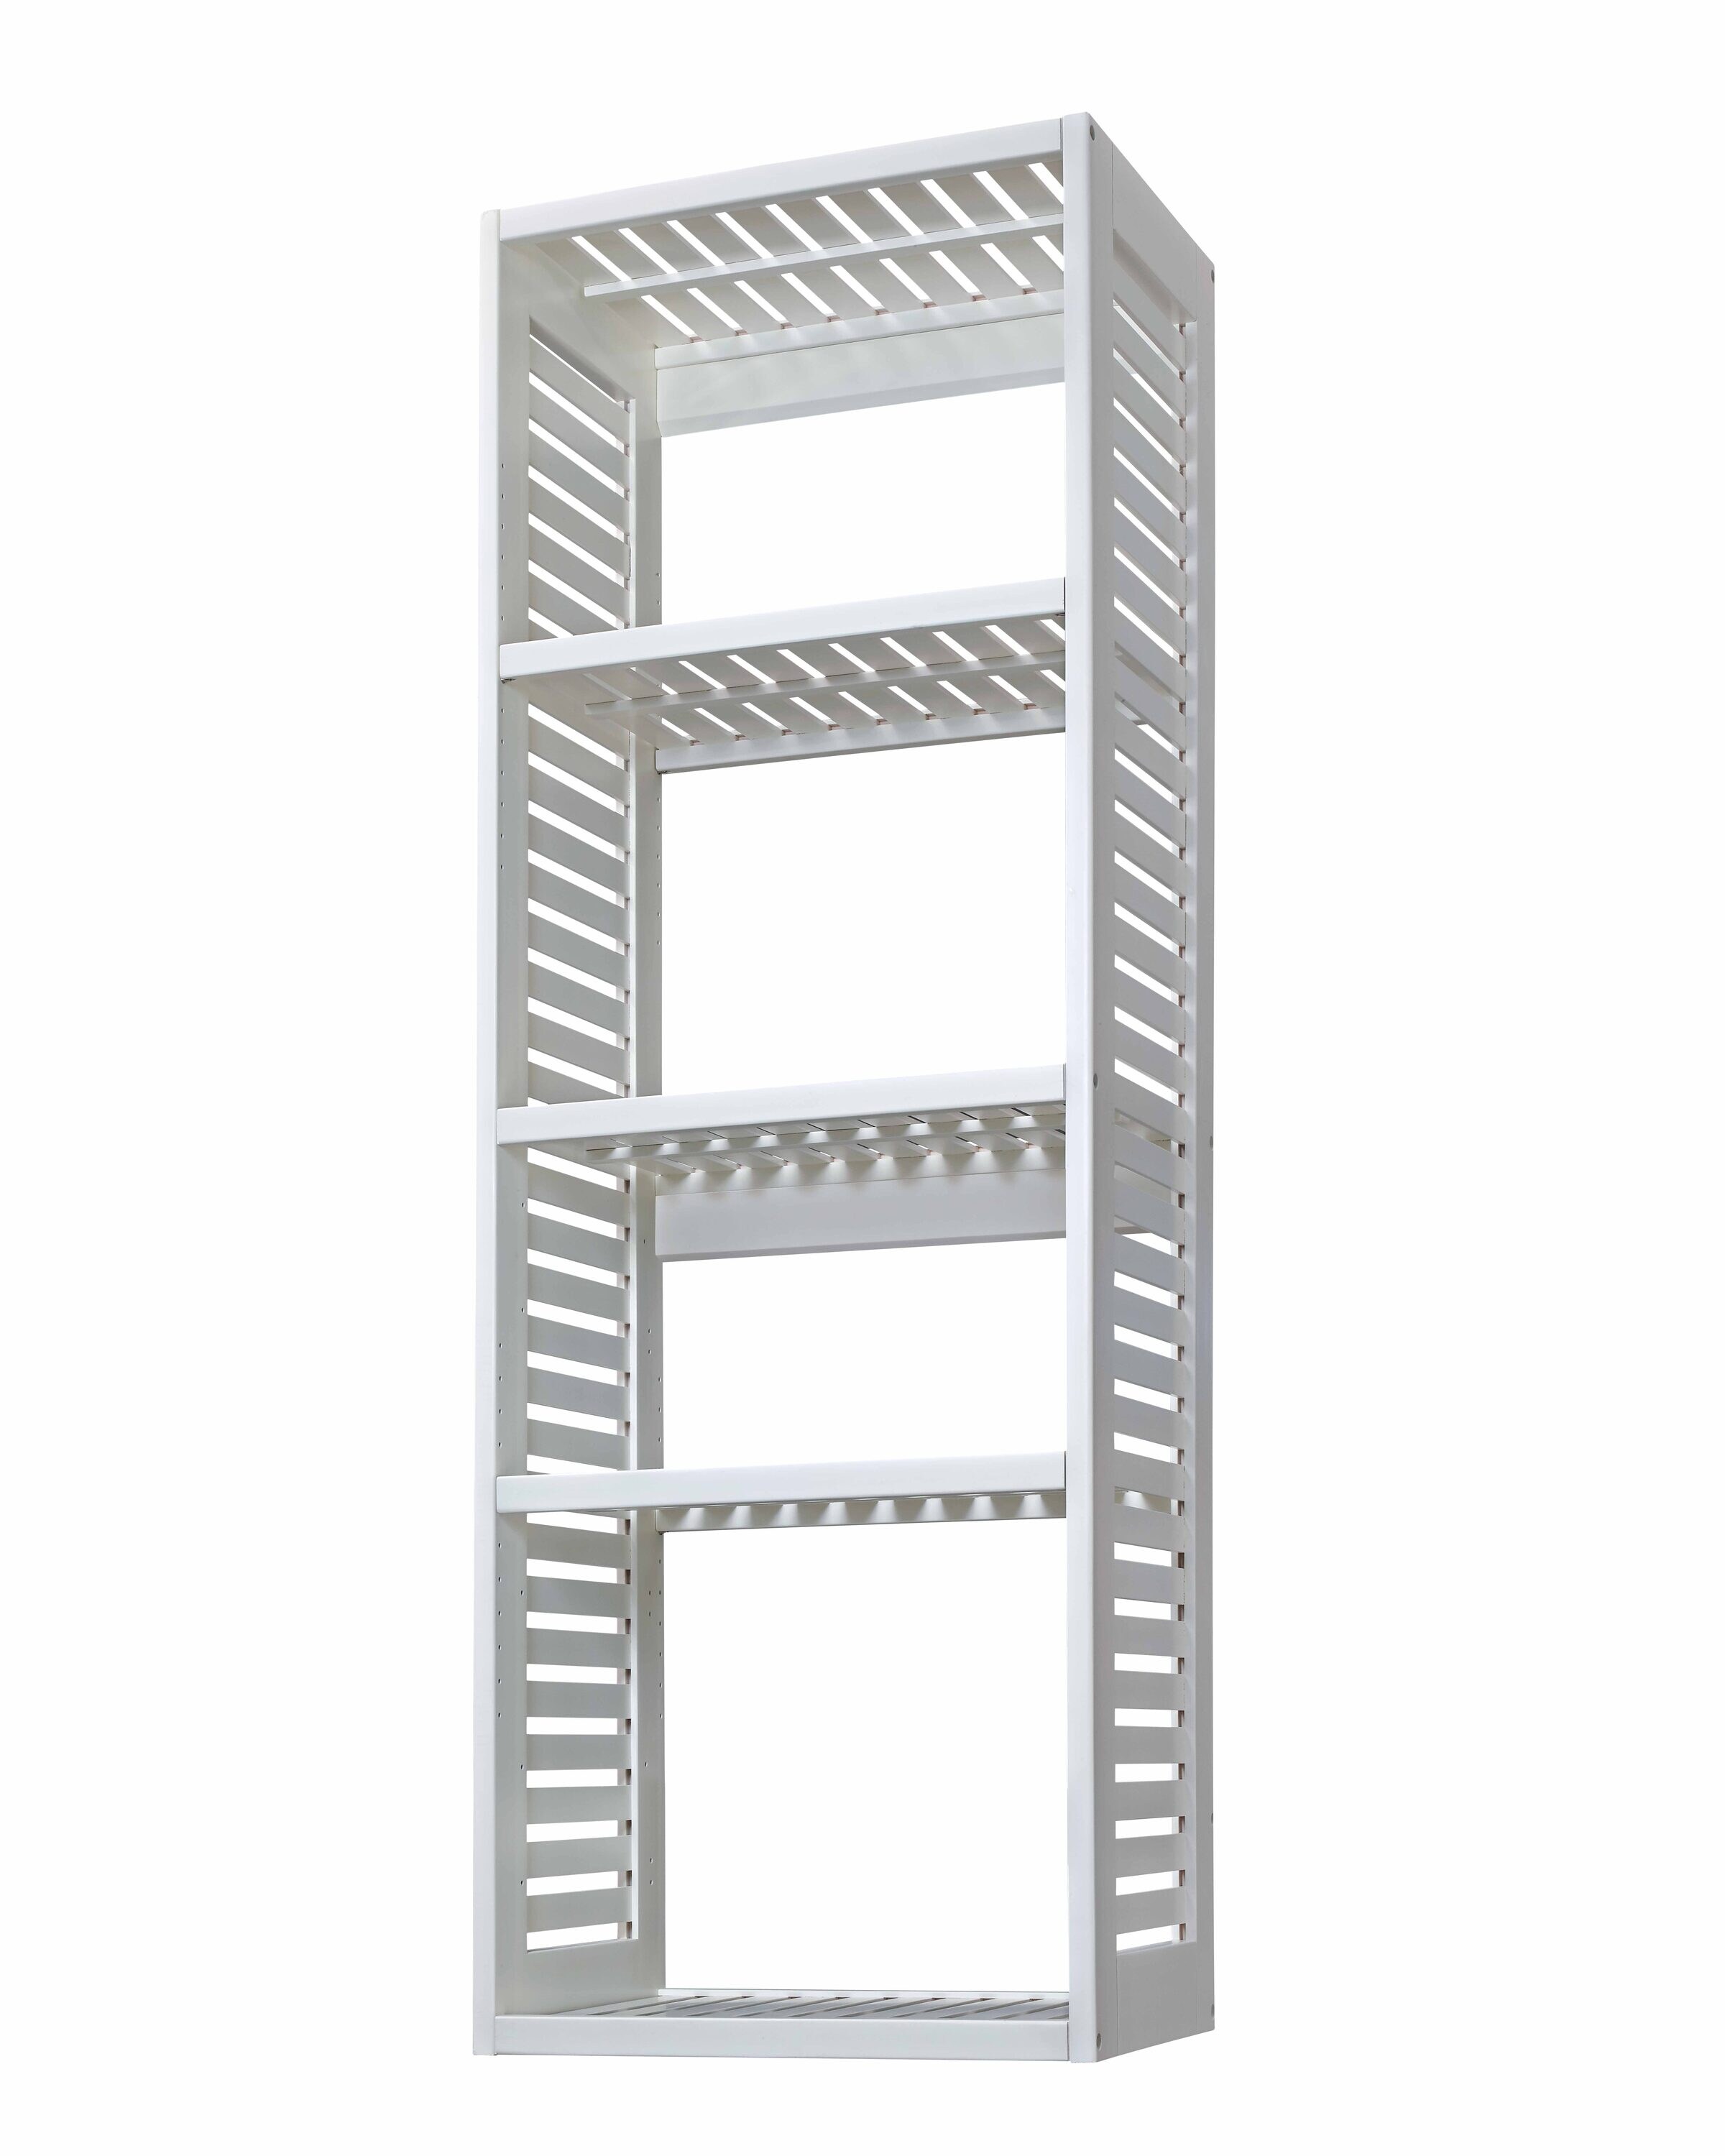 48 in. W to 92 in. W White Closet Shelf Tower with Shelf and Rod Extensions  Wood Closet System